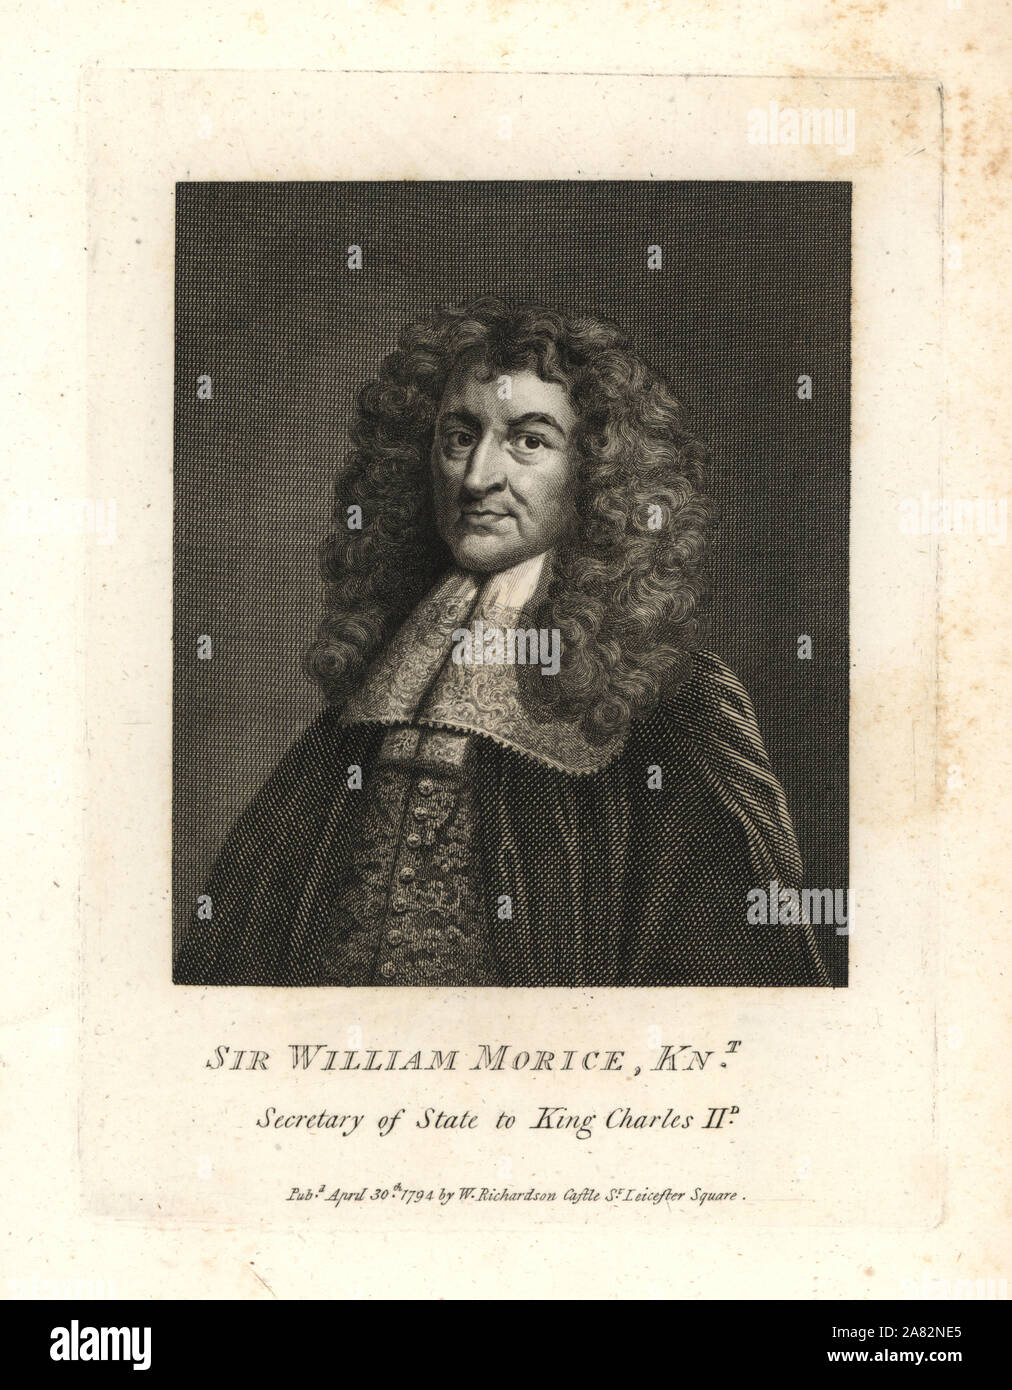 Sir William Morice, Secretary of State to King Charles II of England. Copperplate engraving from William Richardson's Portraits Illustrating Granger's Biographical History of England, London, 1792–1812. James Granger (1723–1776) was an English clergyman, biographer, and print collector. Stock Photo